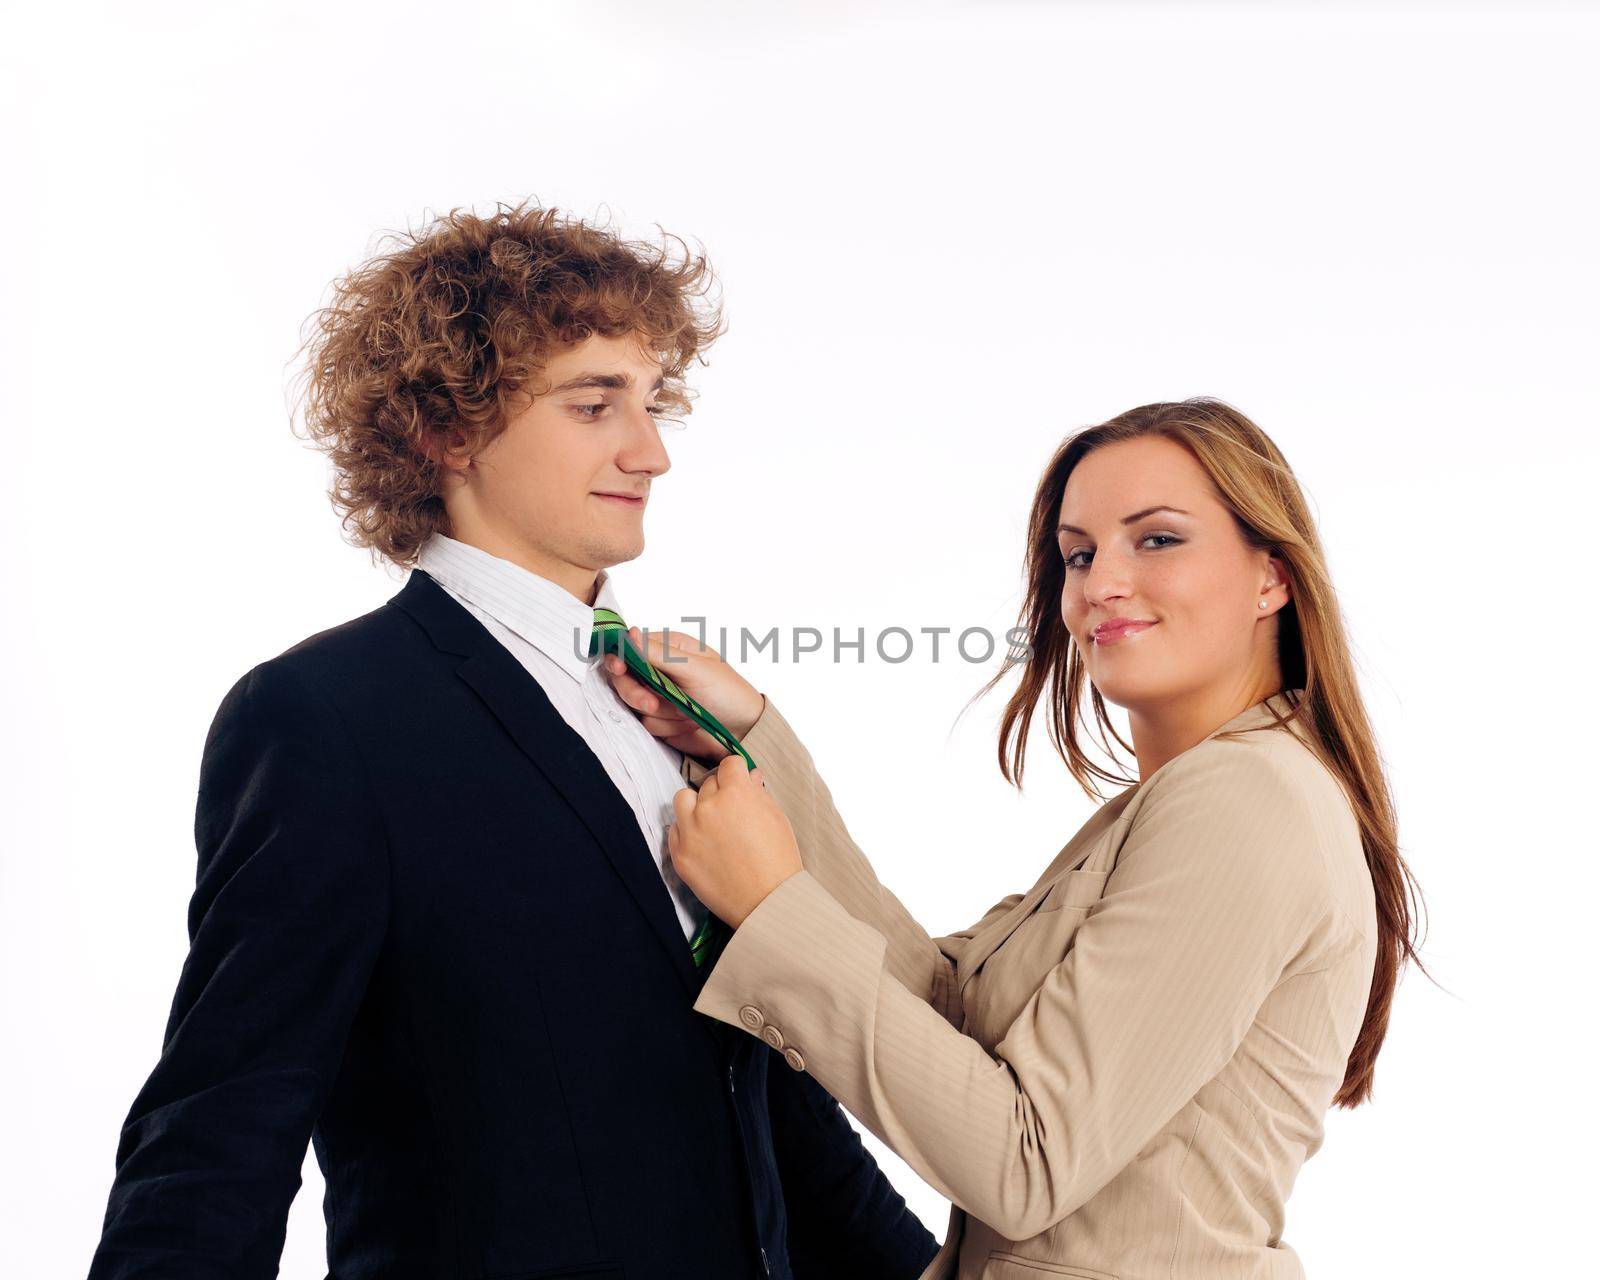 Business people standing in a studio, she is binding his tie